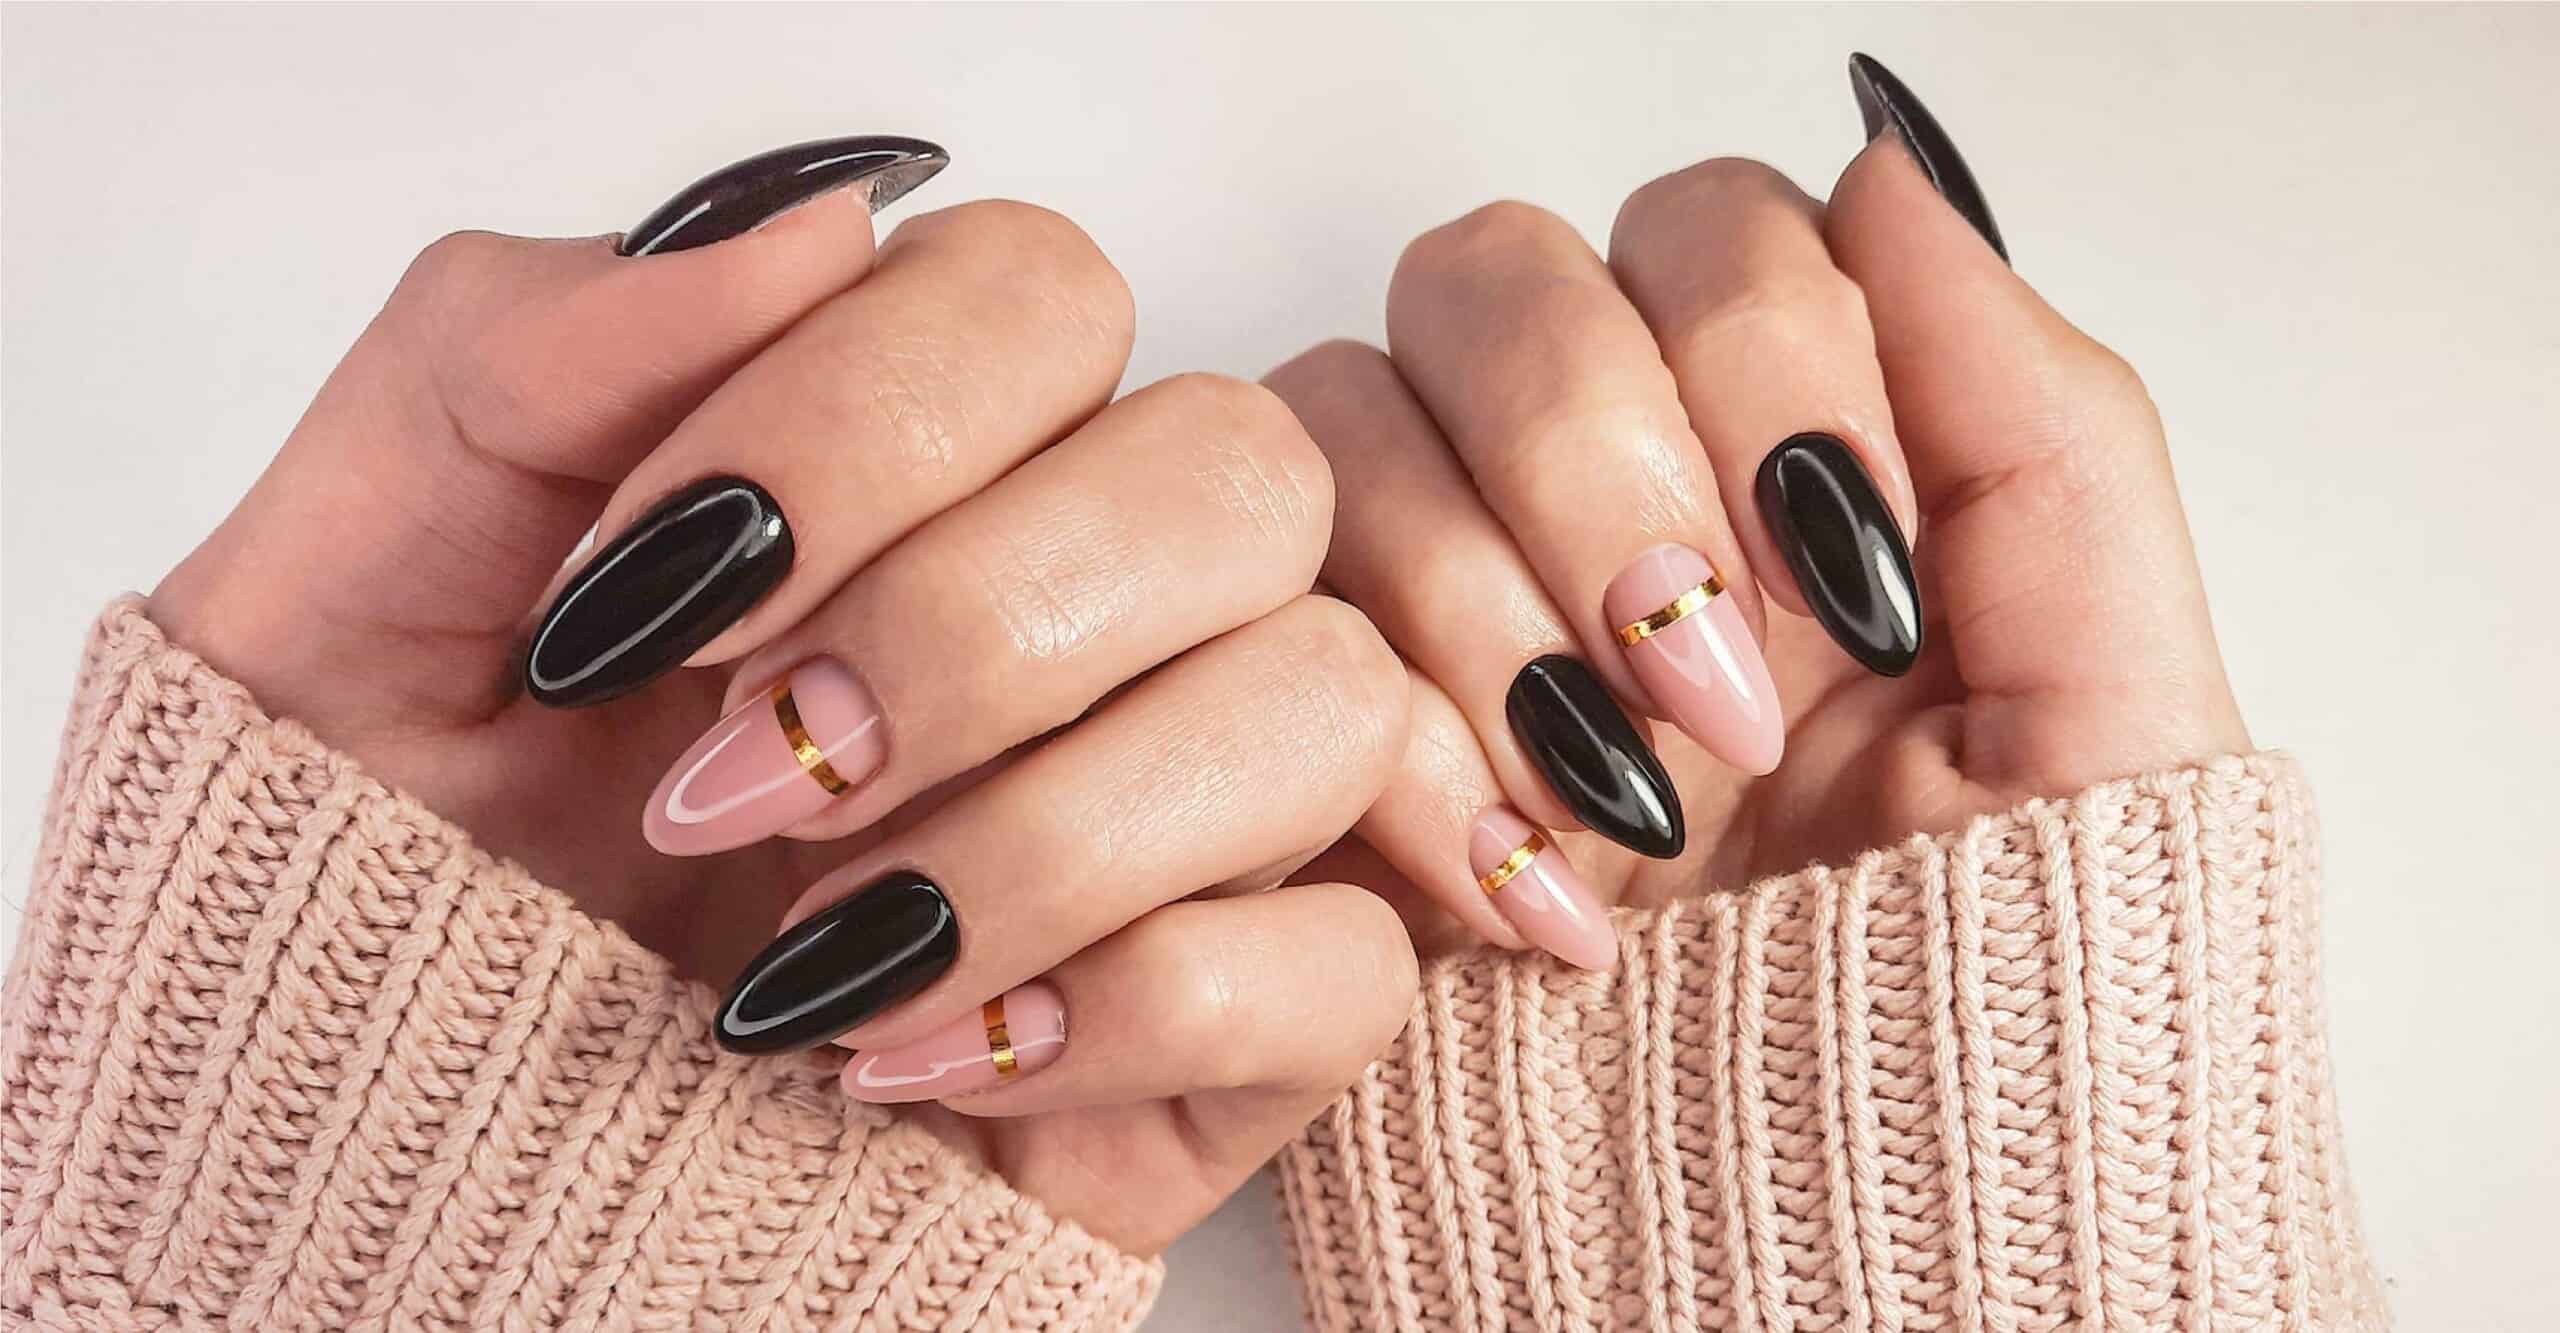 Top 30 best nail salons in America